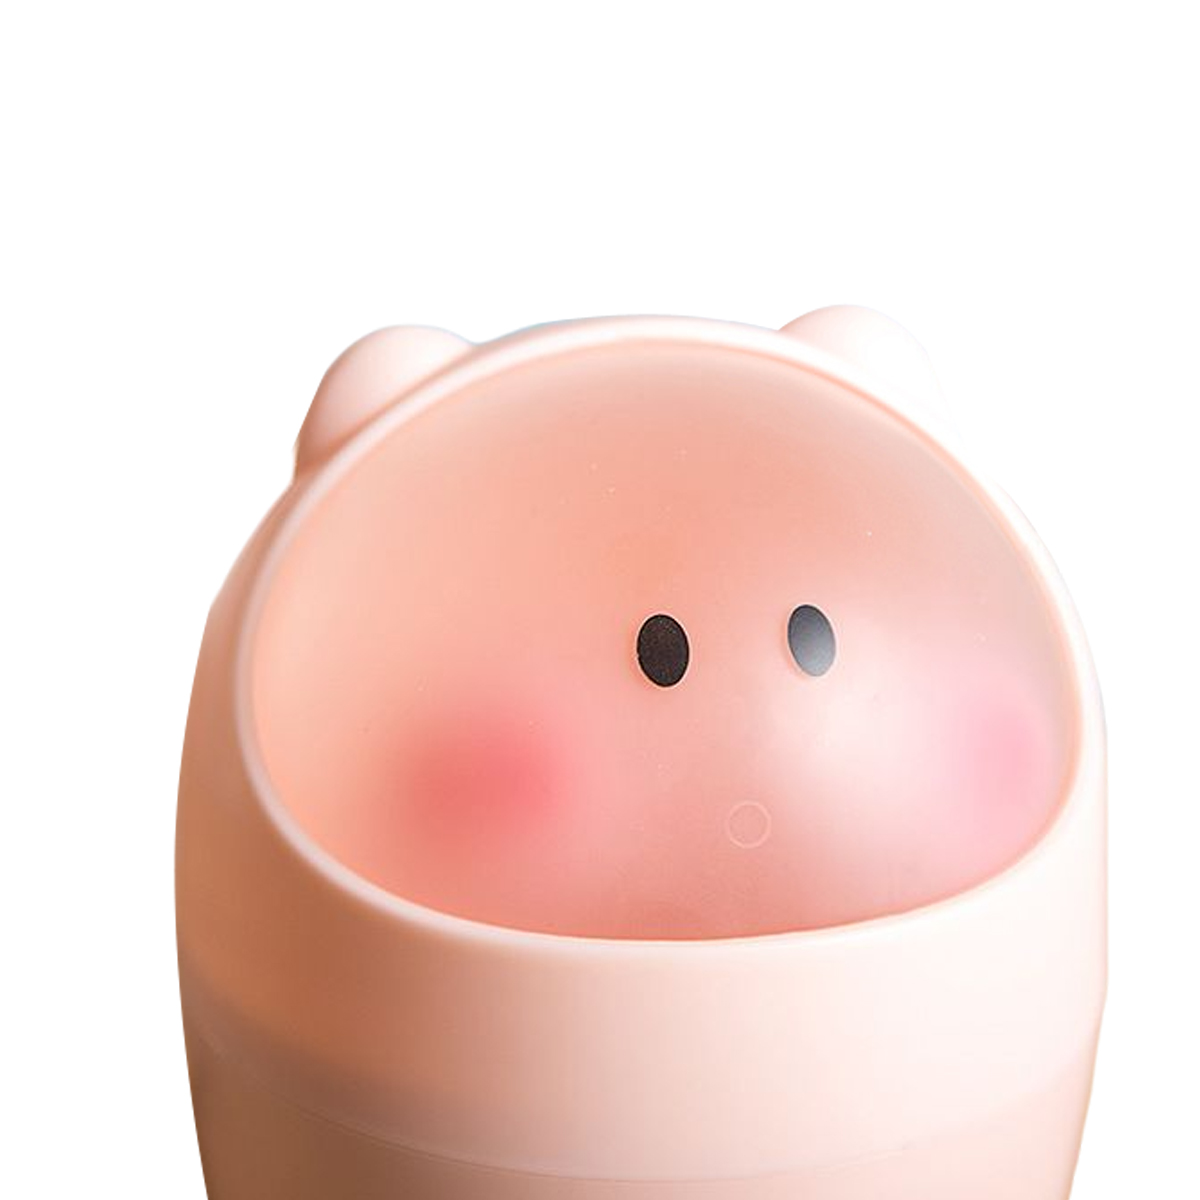 Mini Flip Storage Bucket Cartoon Pig Office Desktop Decoration Life Household Accessories Small Easy To Carry